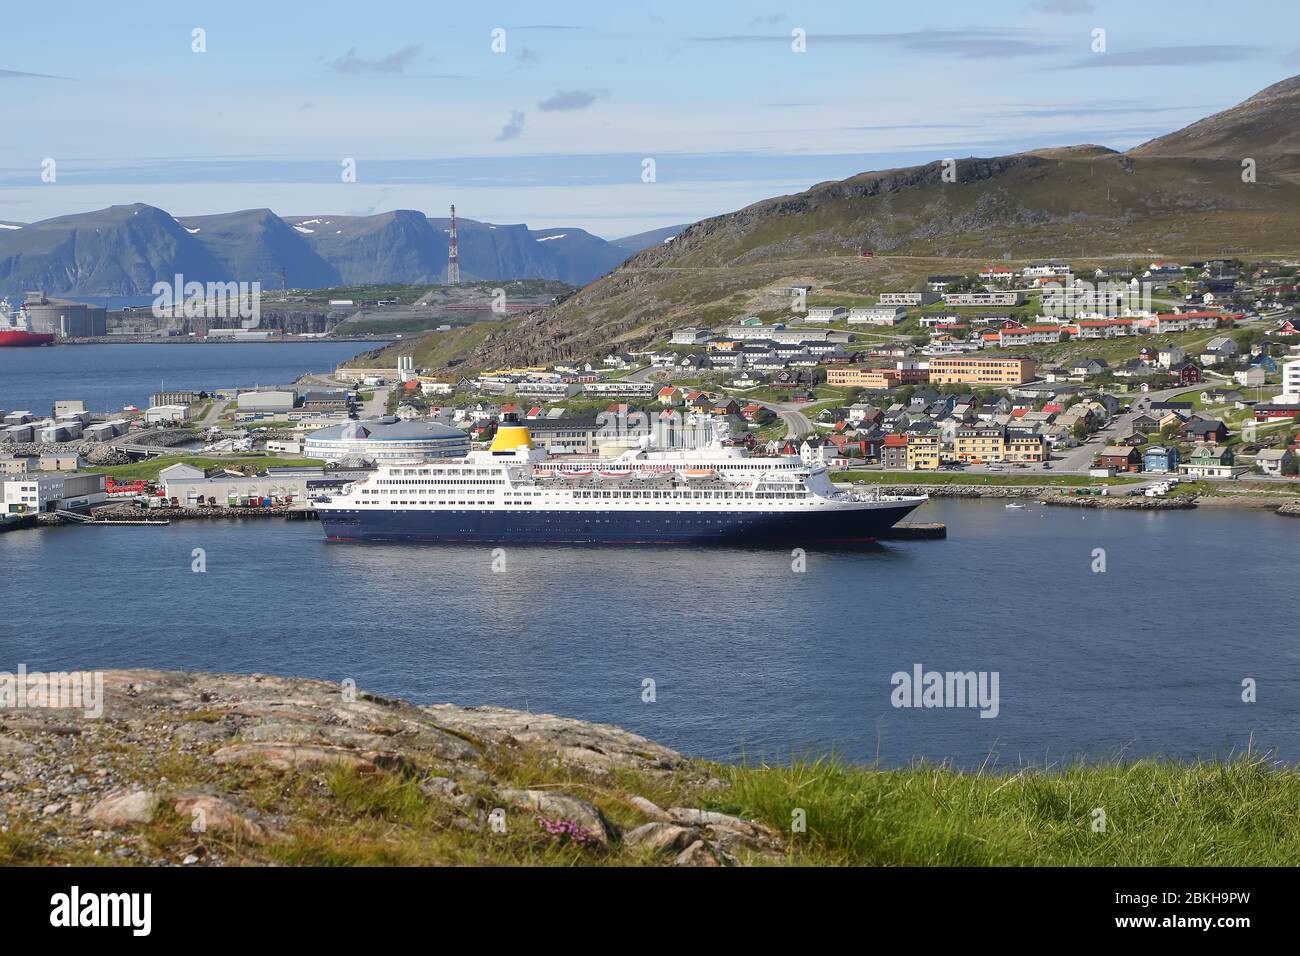 Cruise ship docked in the port of Hammerfest, the northernmost town in the world with more than 10,000 inhabitants, Troms og Finnmark county, Norway Stock Photo